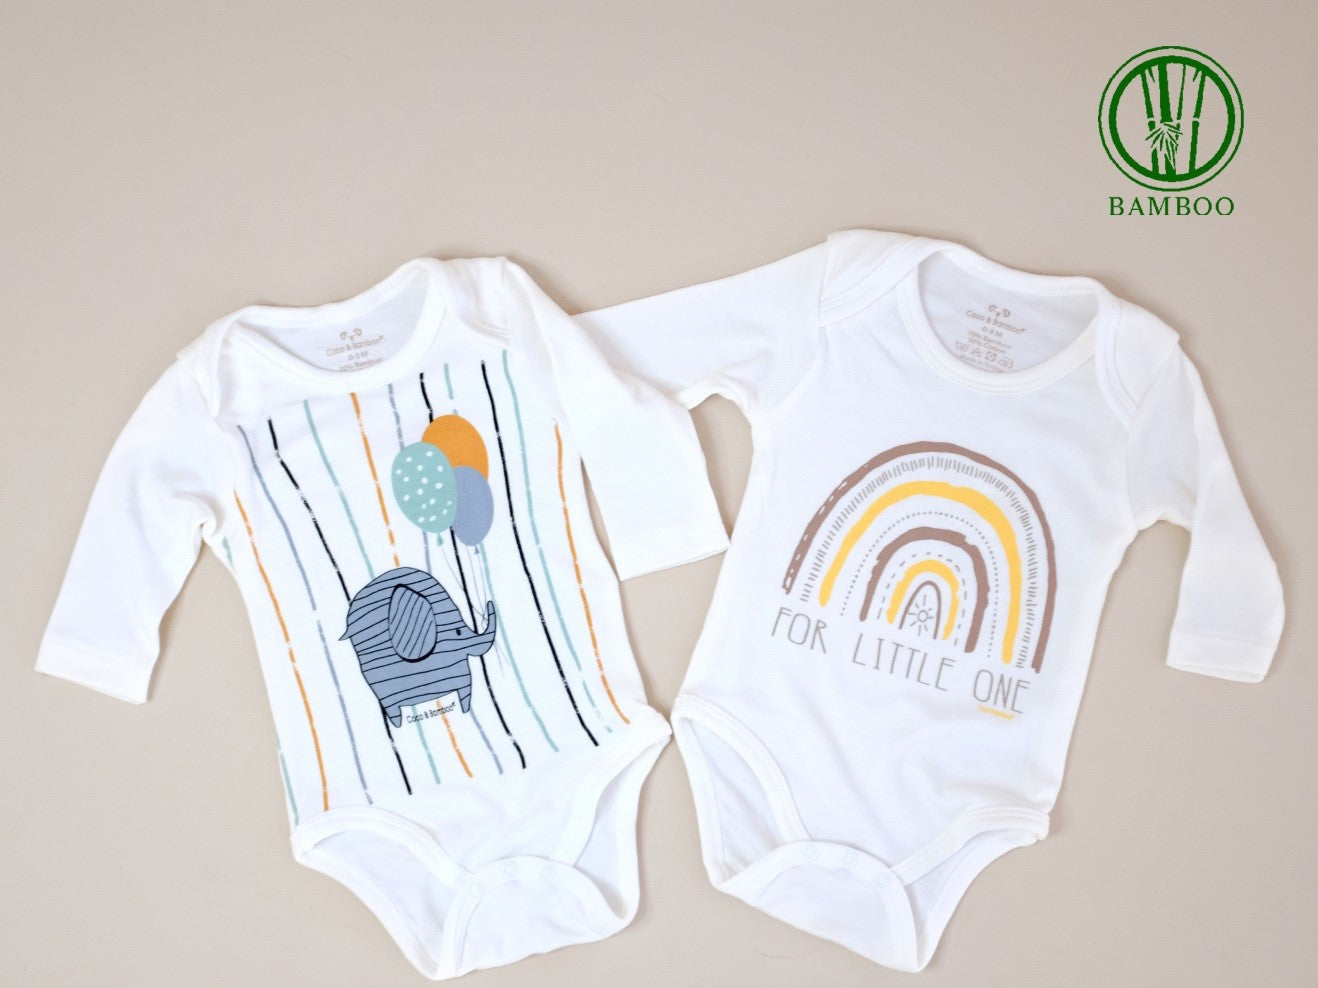 bamboo cotton long sleeve bodysuits for baby girls and boys.